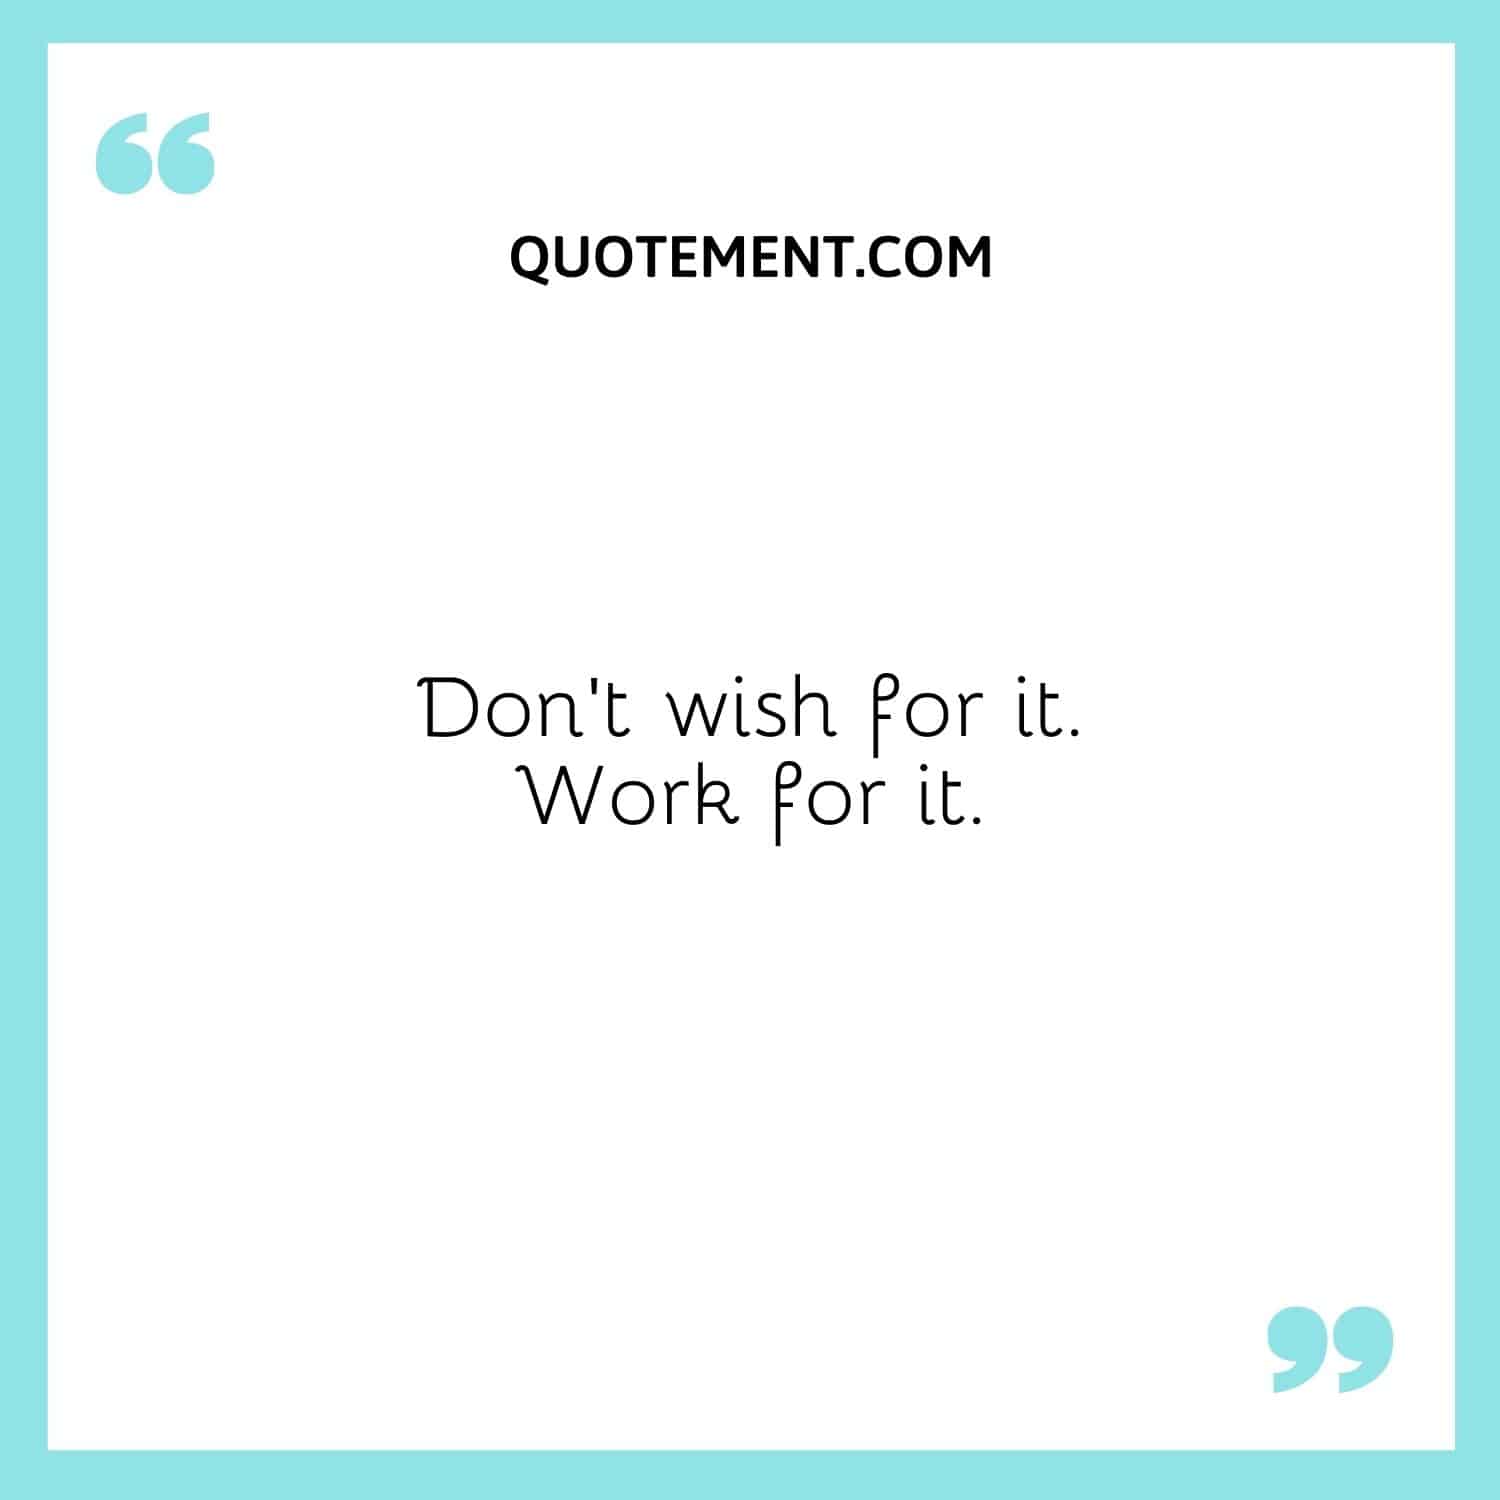 Don’t wish for it. Work for it.